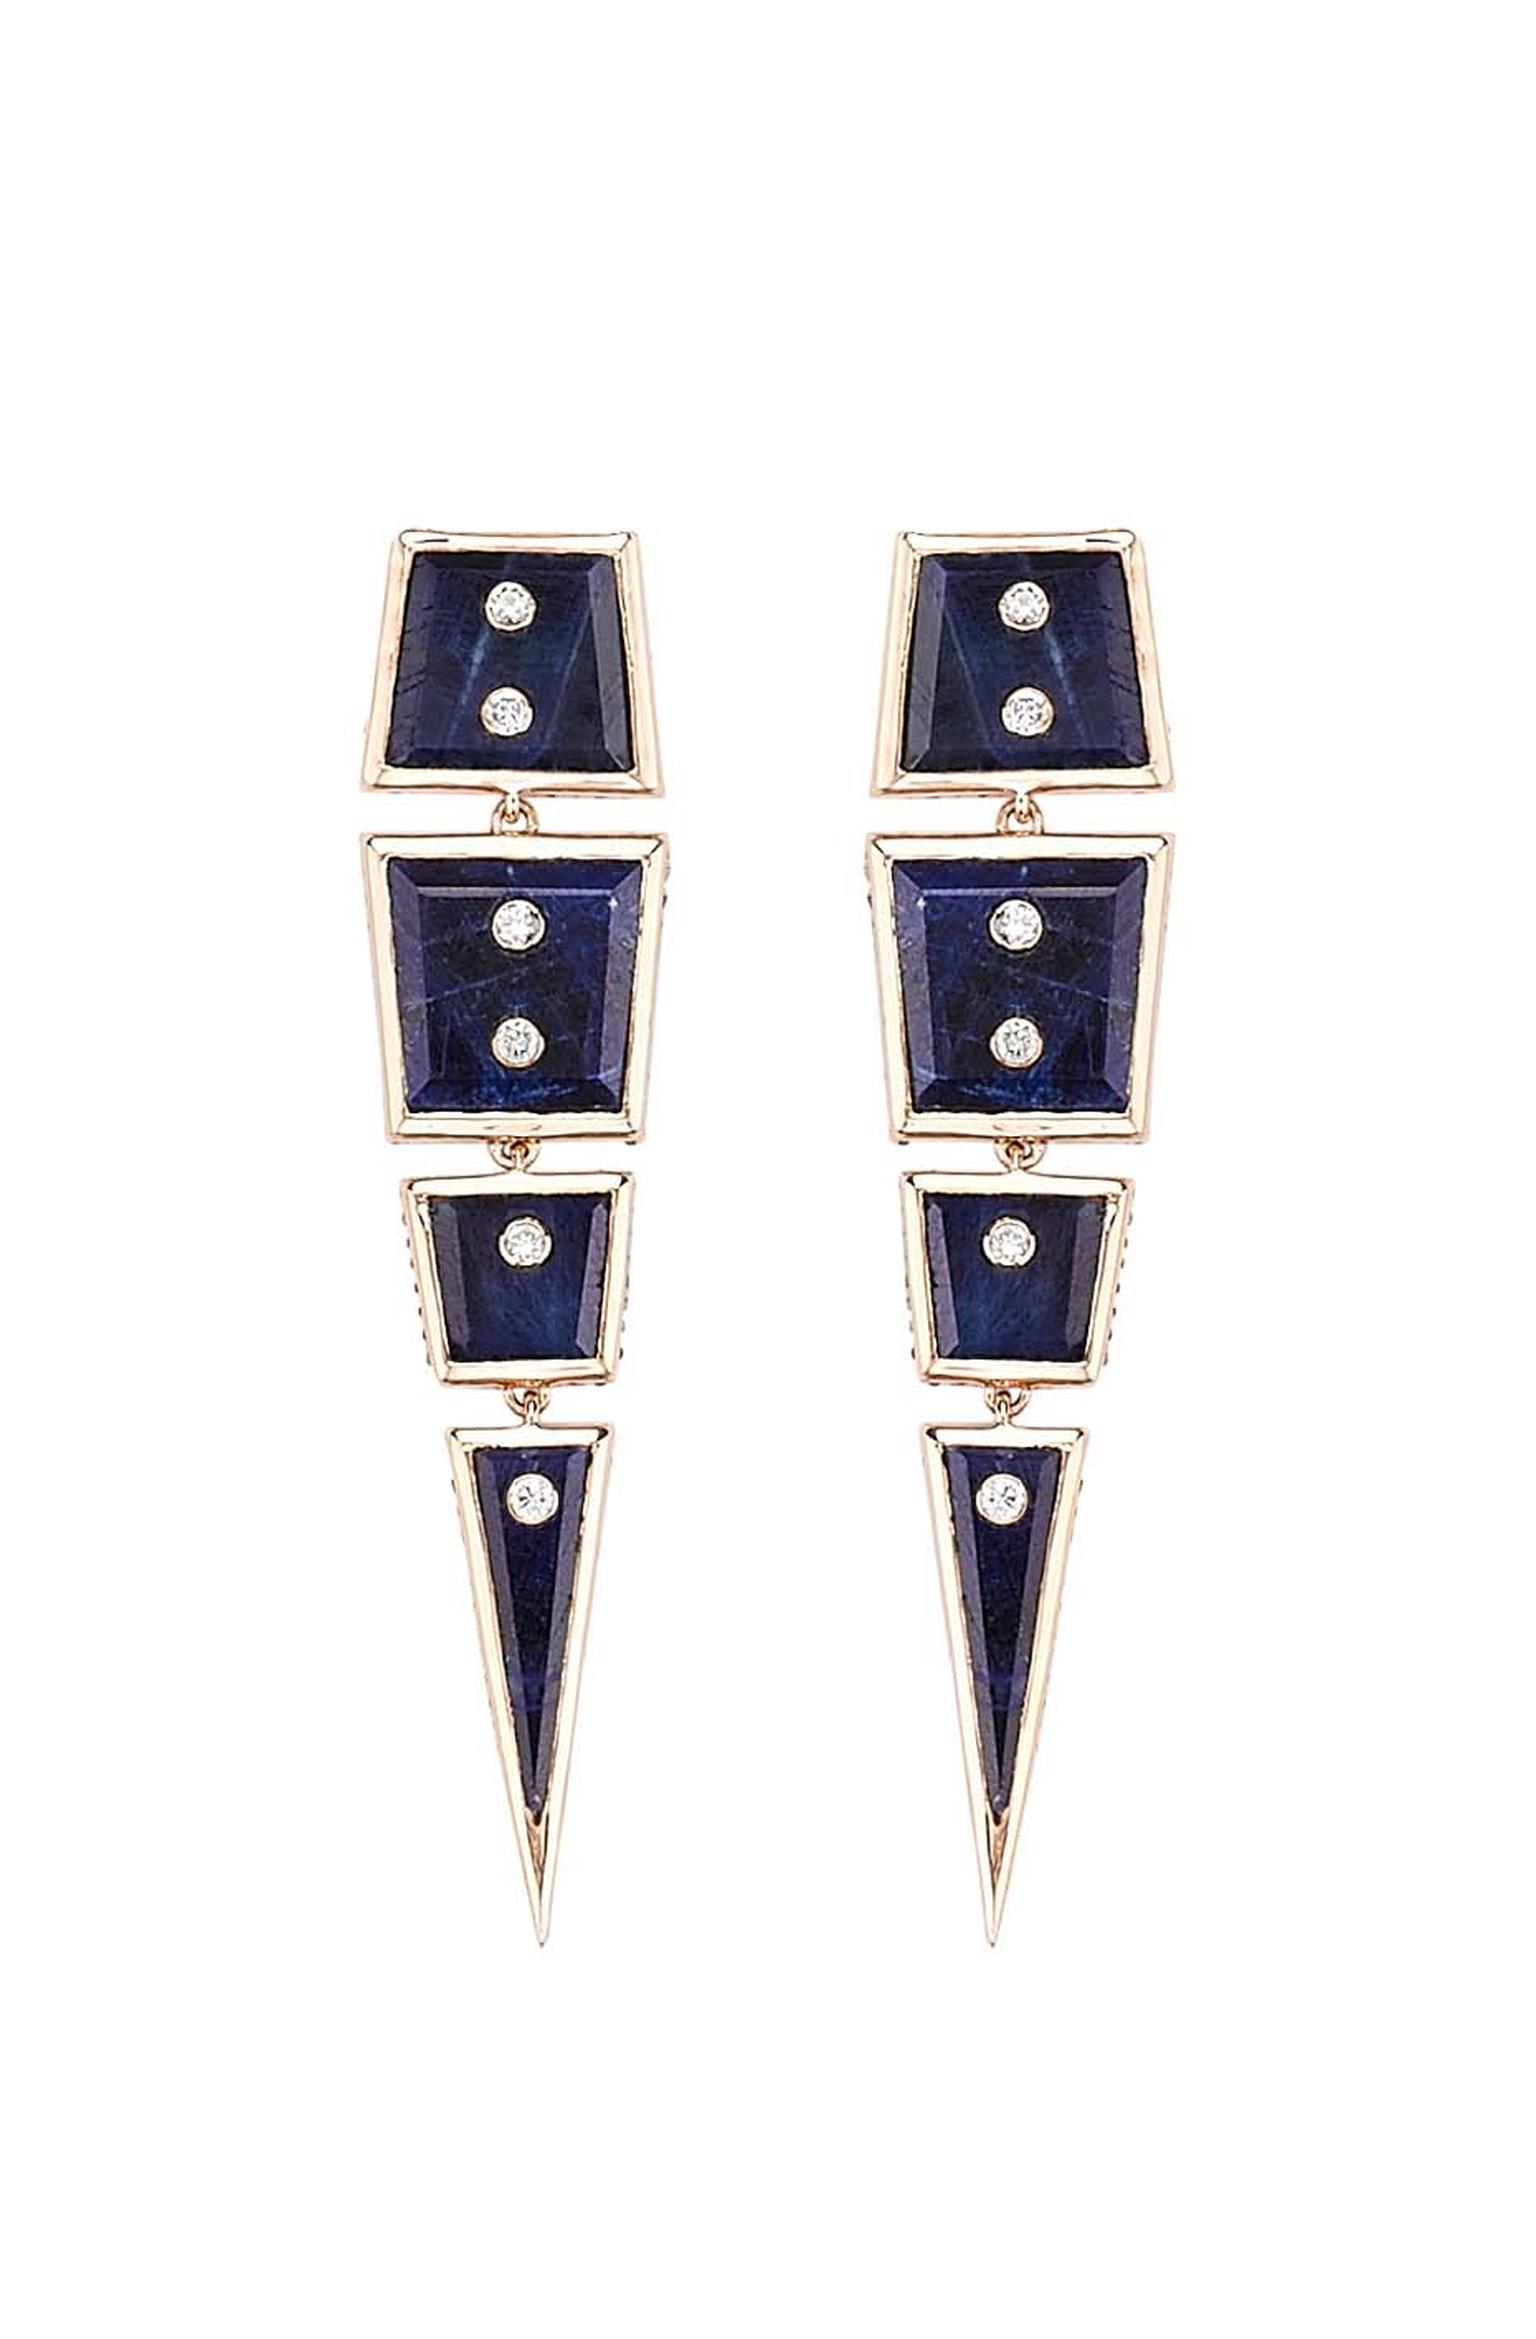 Gold Machu Picchu earrings with blue sapphires (18.24ct) and champagne-cut diamonds, available at Latest Revival.